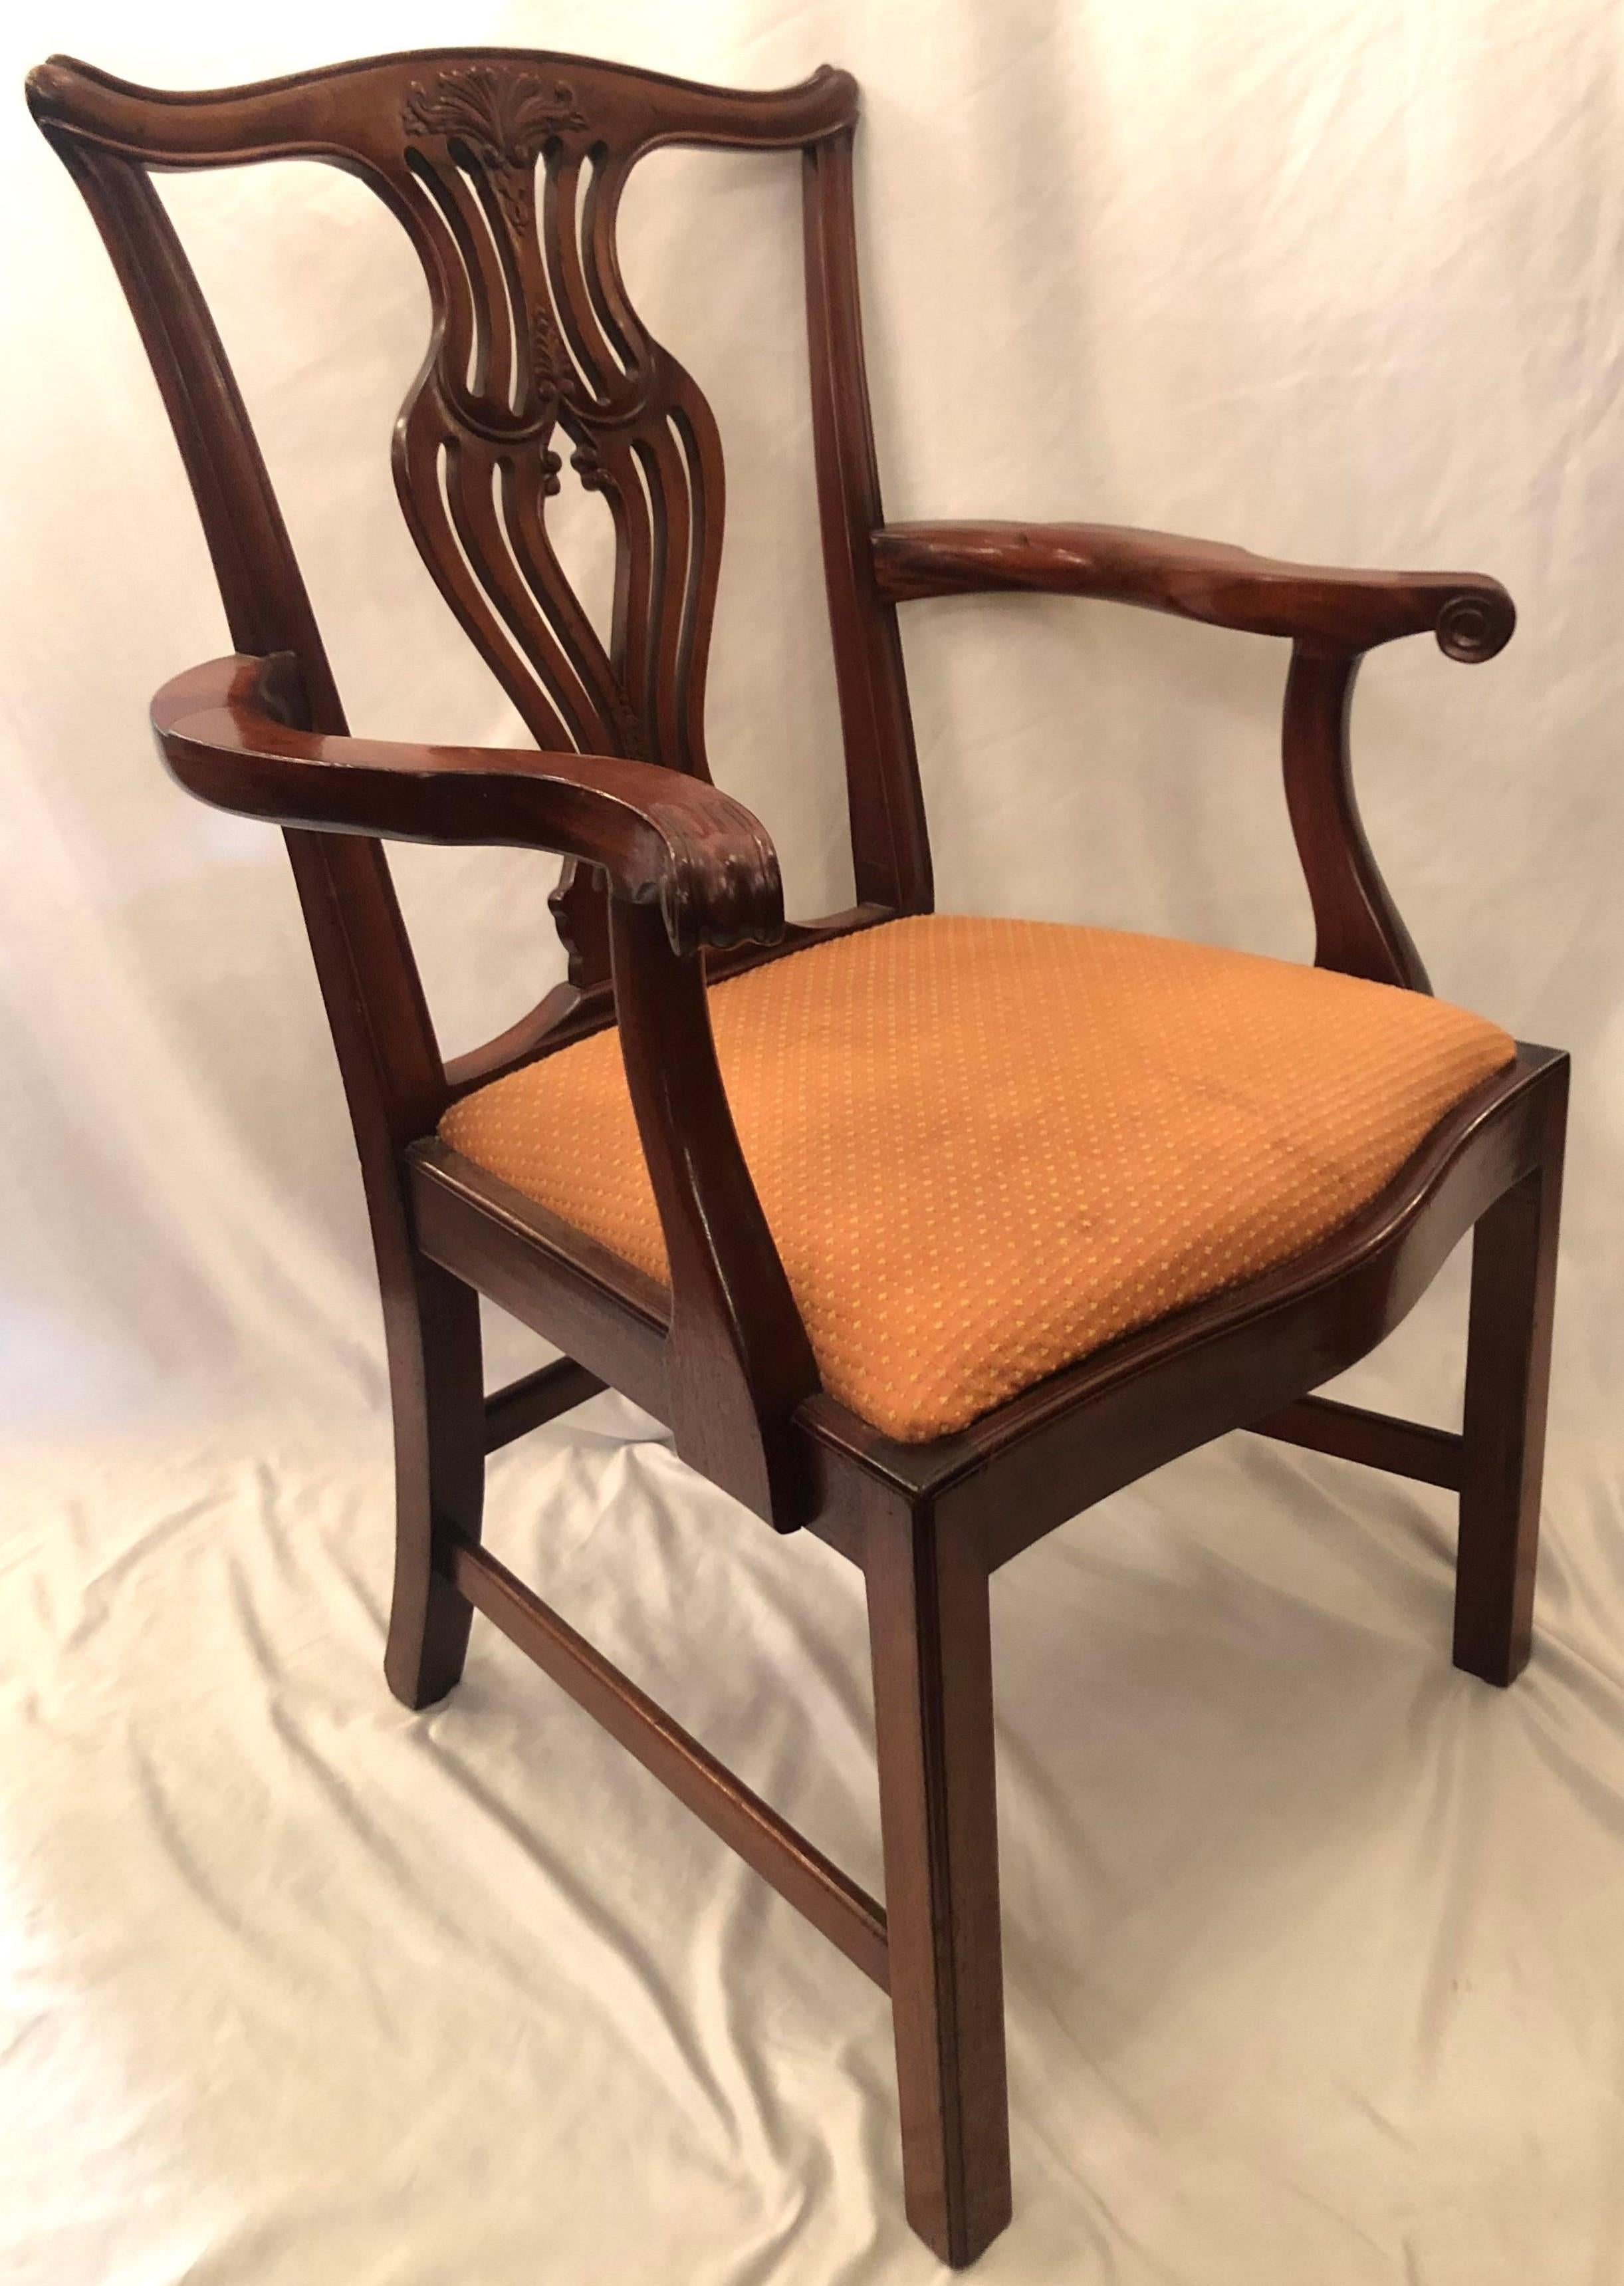 Early 20th Century Set of 8 Antique English Mahogany Dining Chairs, Circa 1910-1920